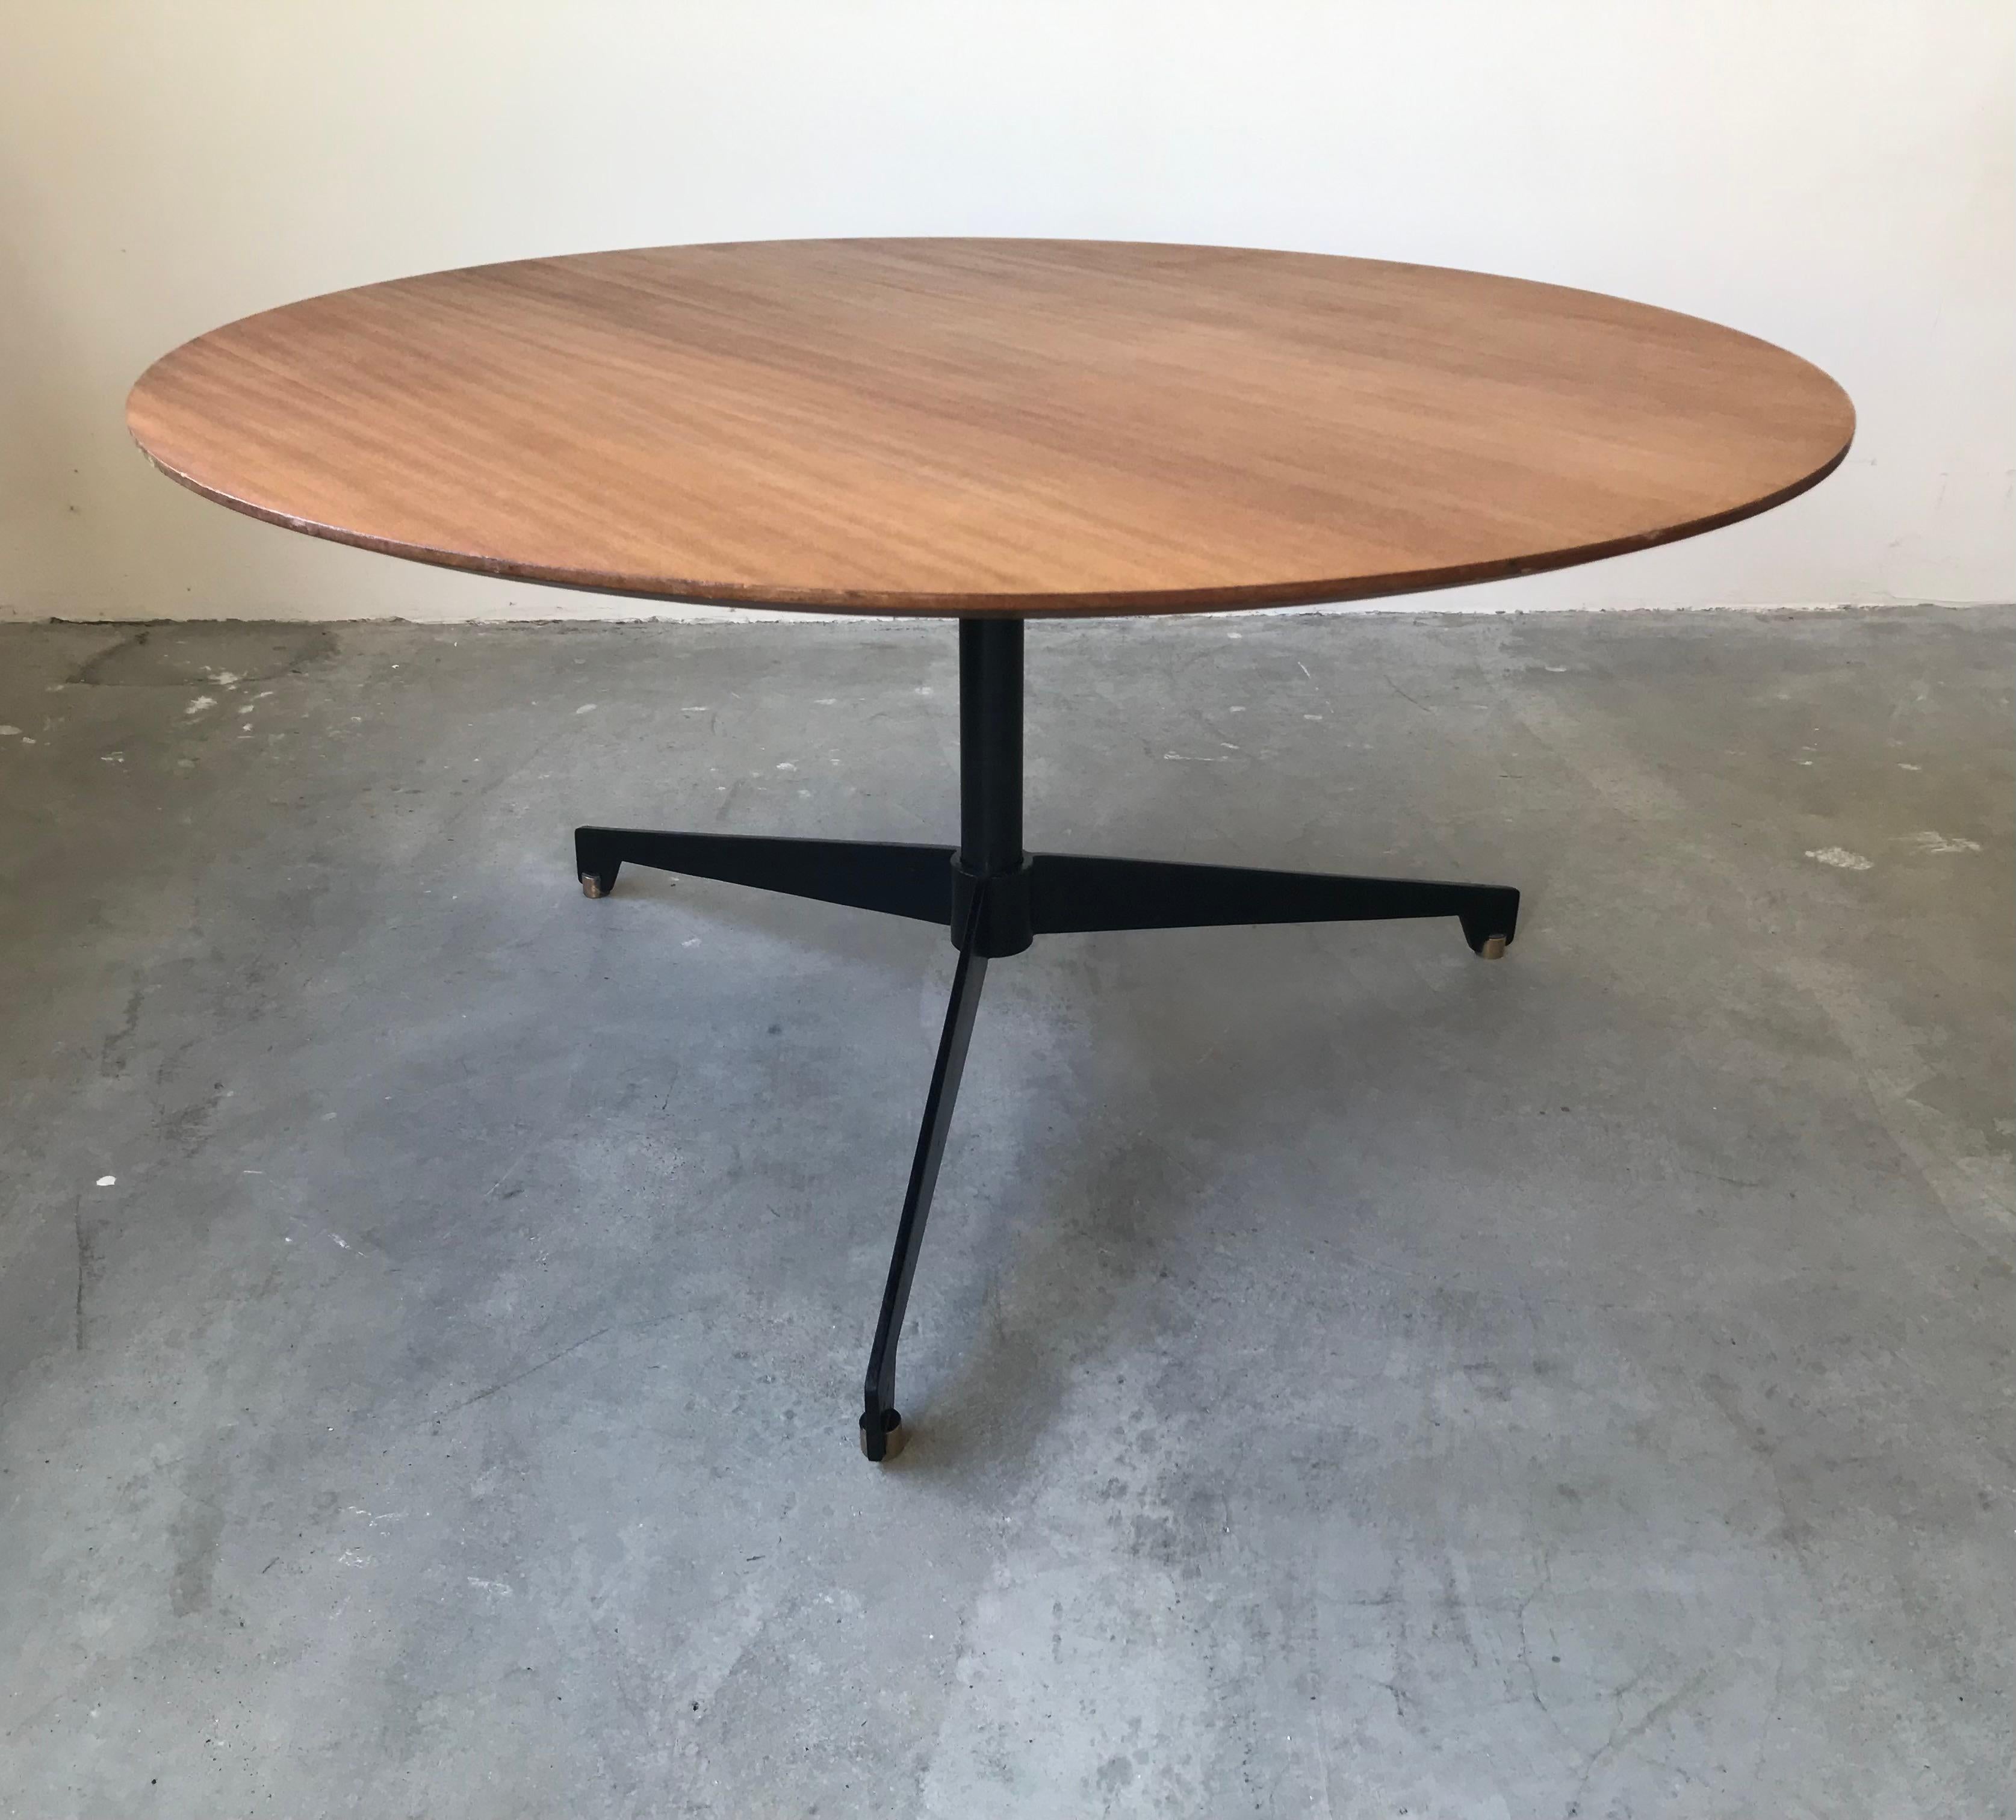 Up and down table attributed to osvaldo borsani, tecno edition, circa 1960. Round teak top resting on a tripod base in black lacquered metal, brass tips. Height adjustable using a handle attached to the foot, it will serve as a dining table with a